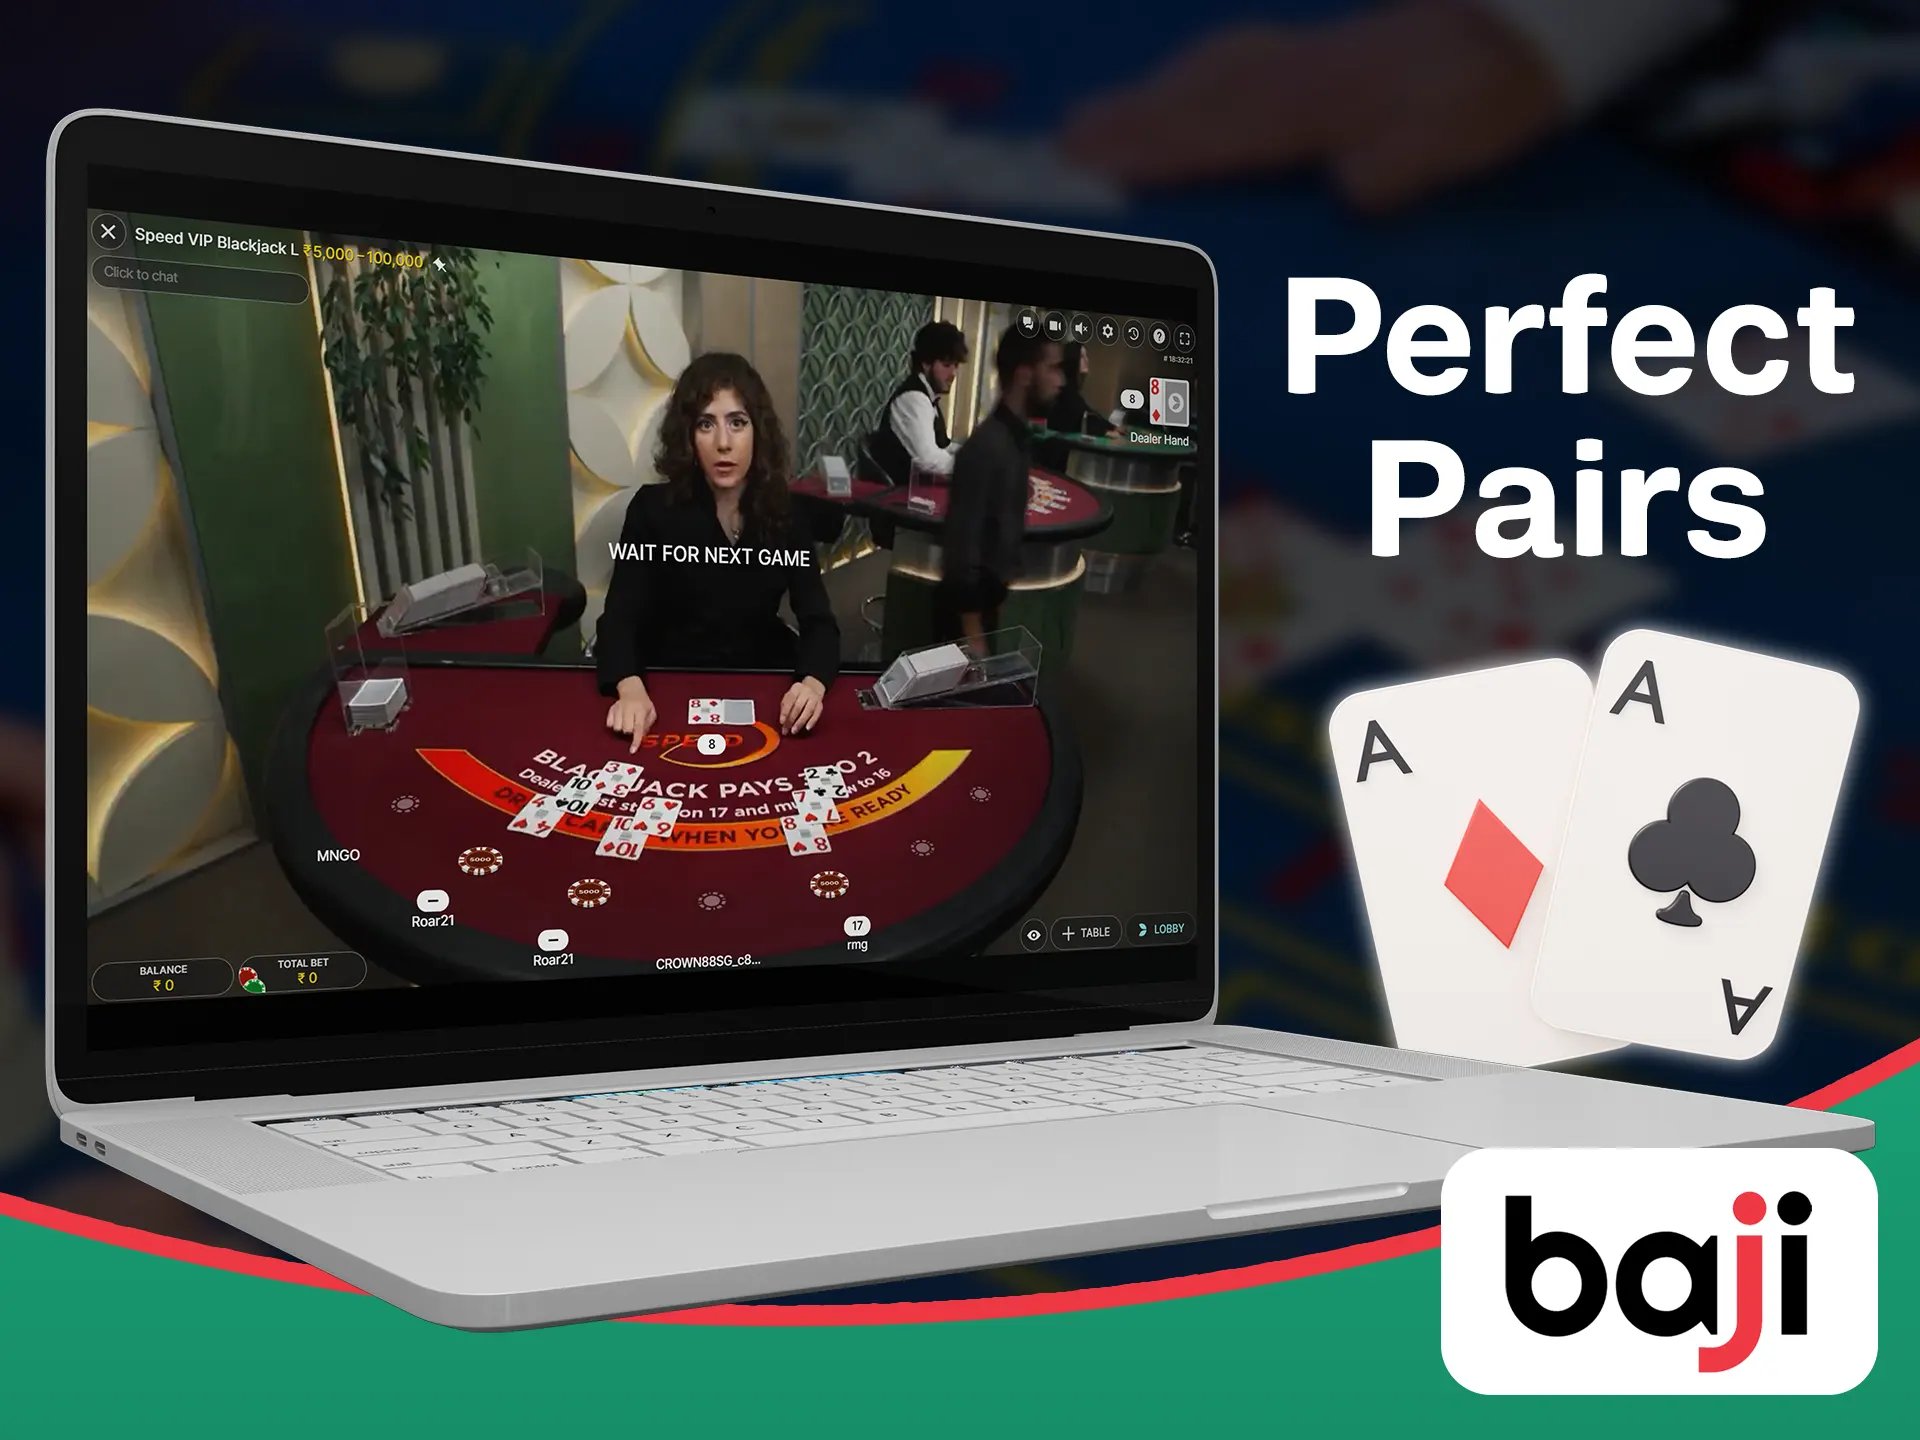 Draw perfect pairs and win money by playing perfect pairs type of blackjack at the Baji.